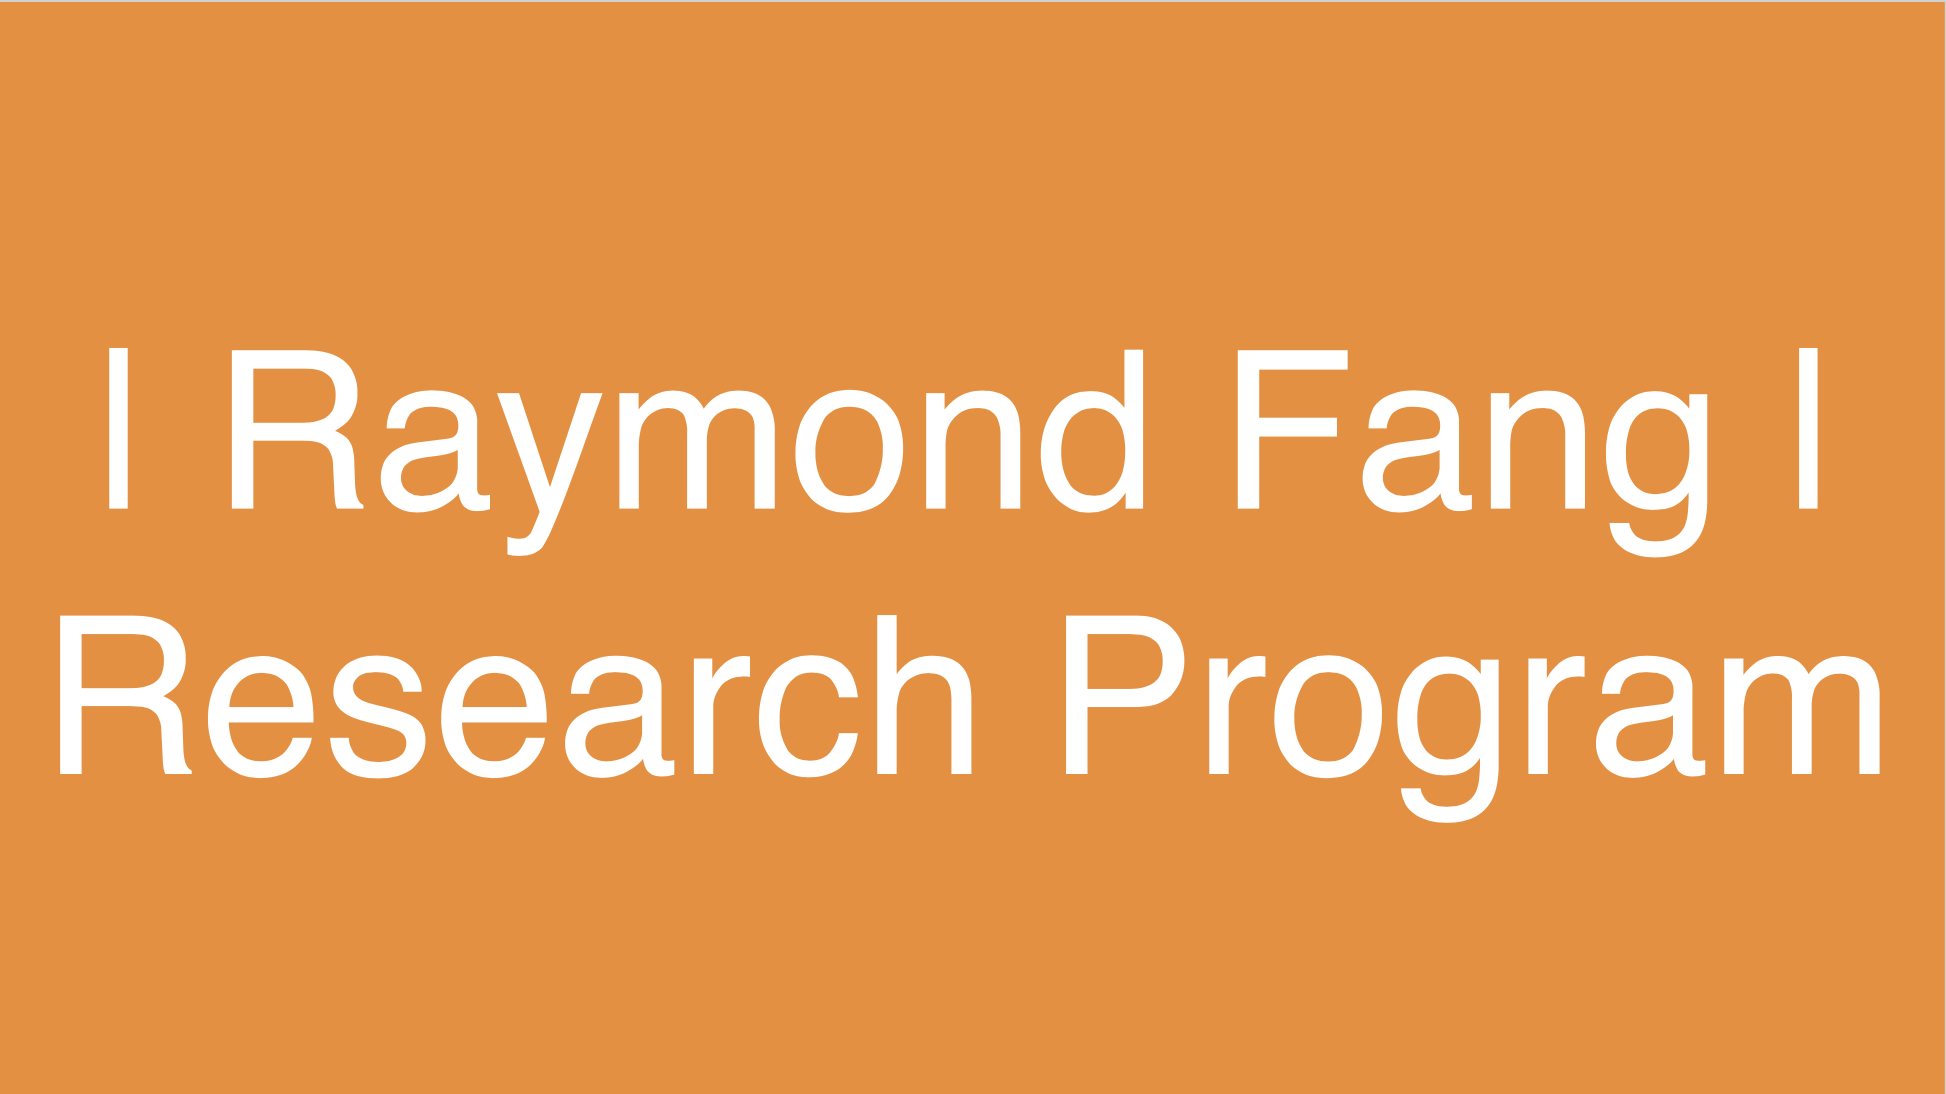 This image says "Raymond Fang, Research Program"